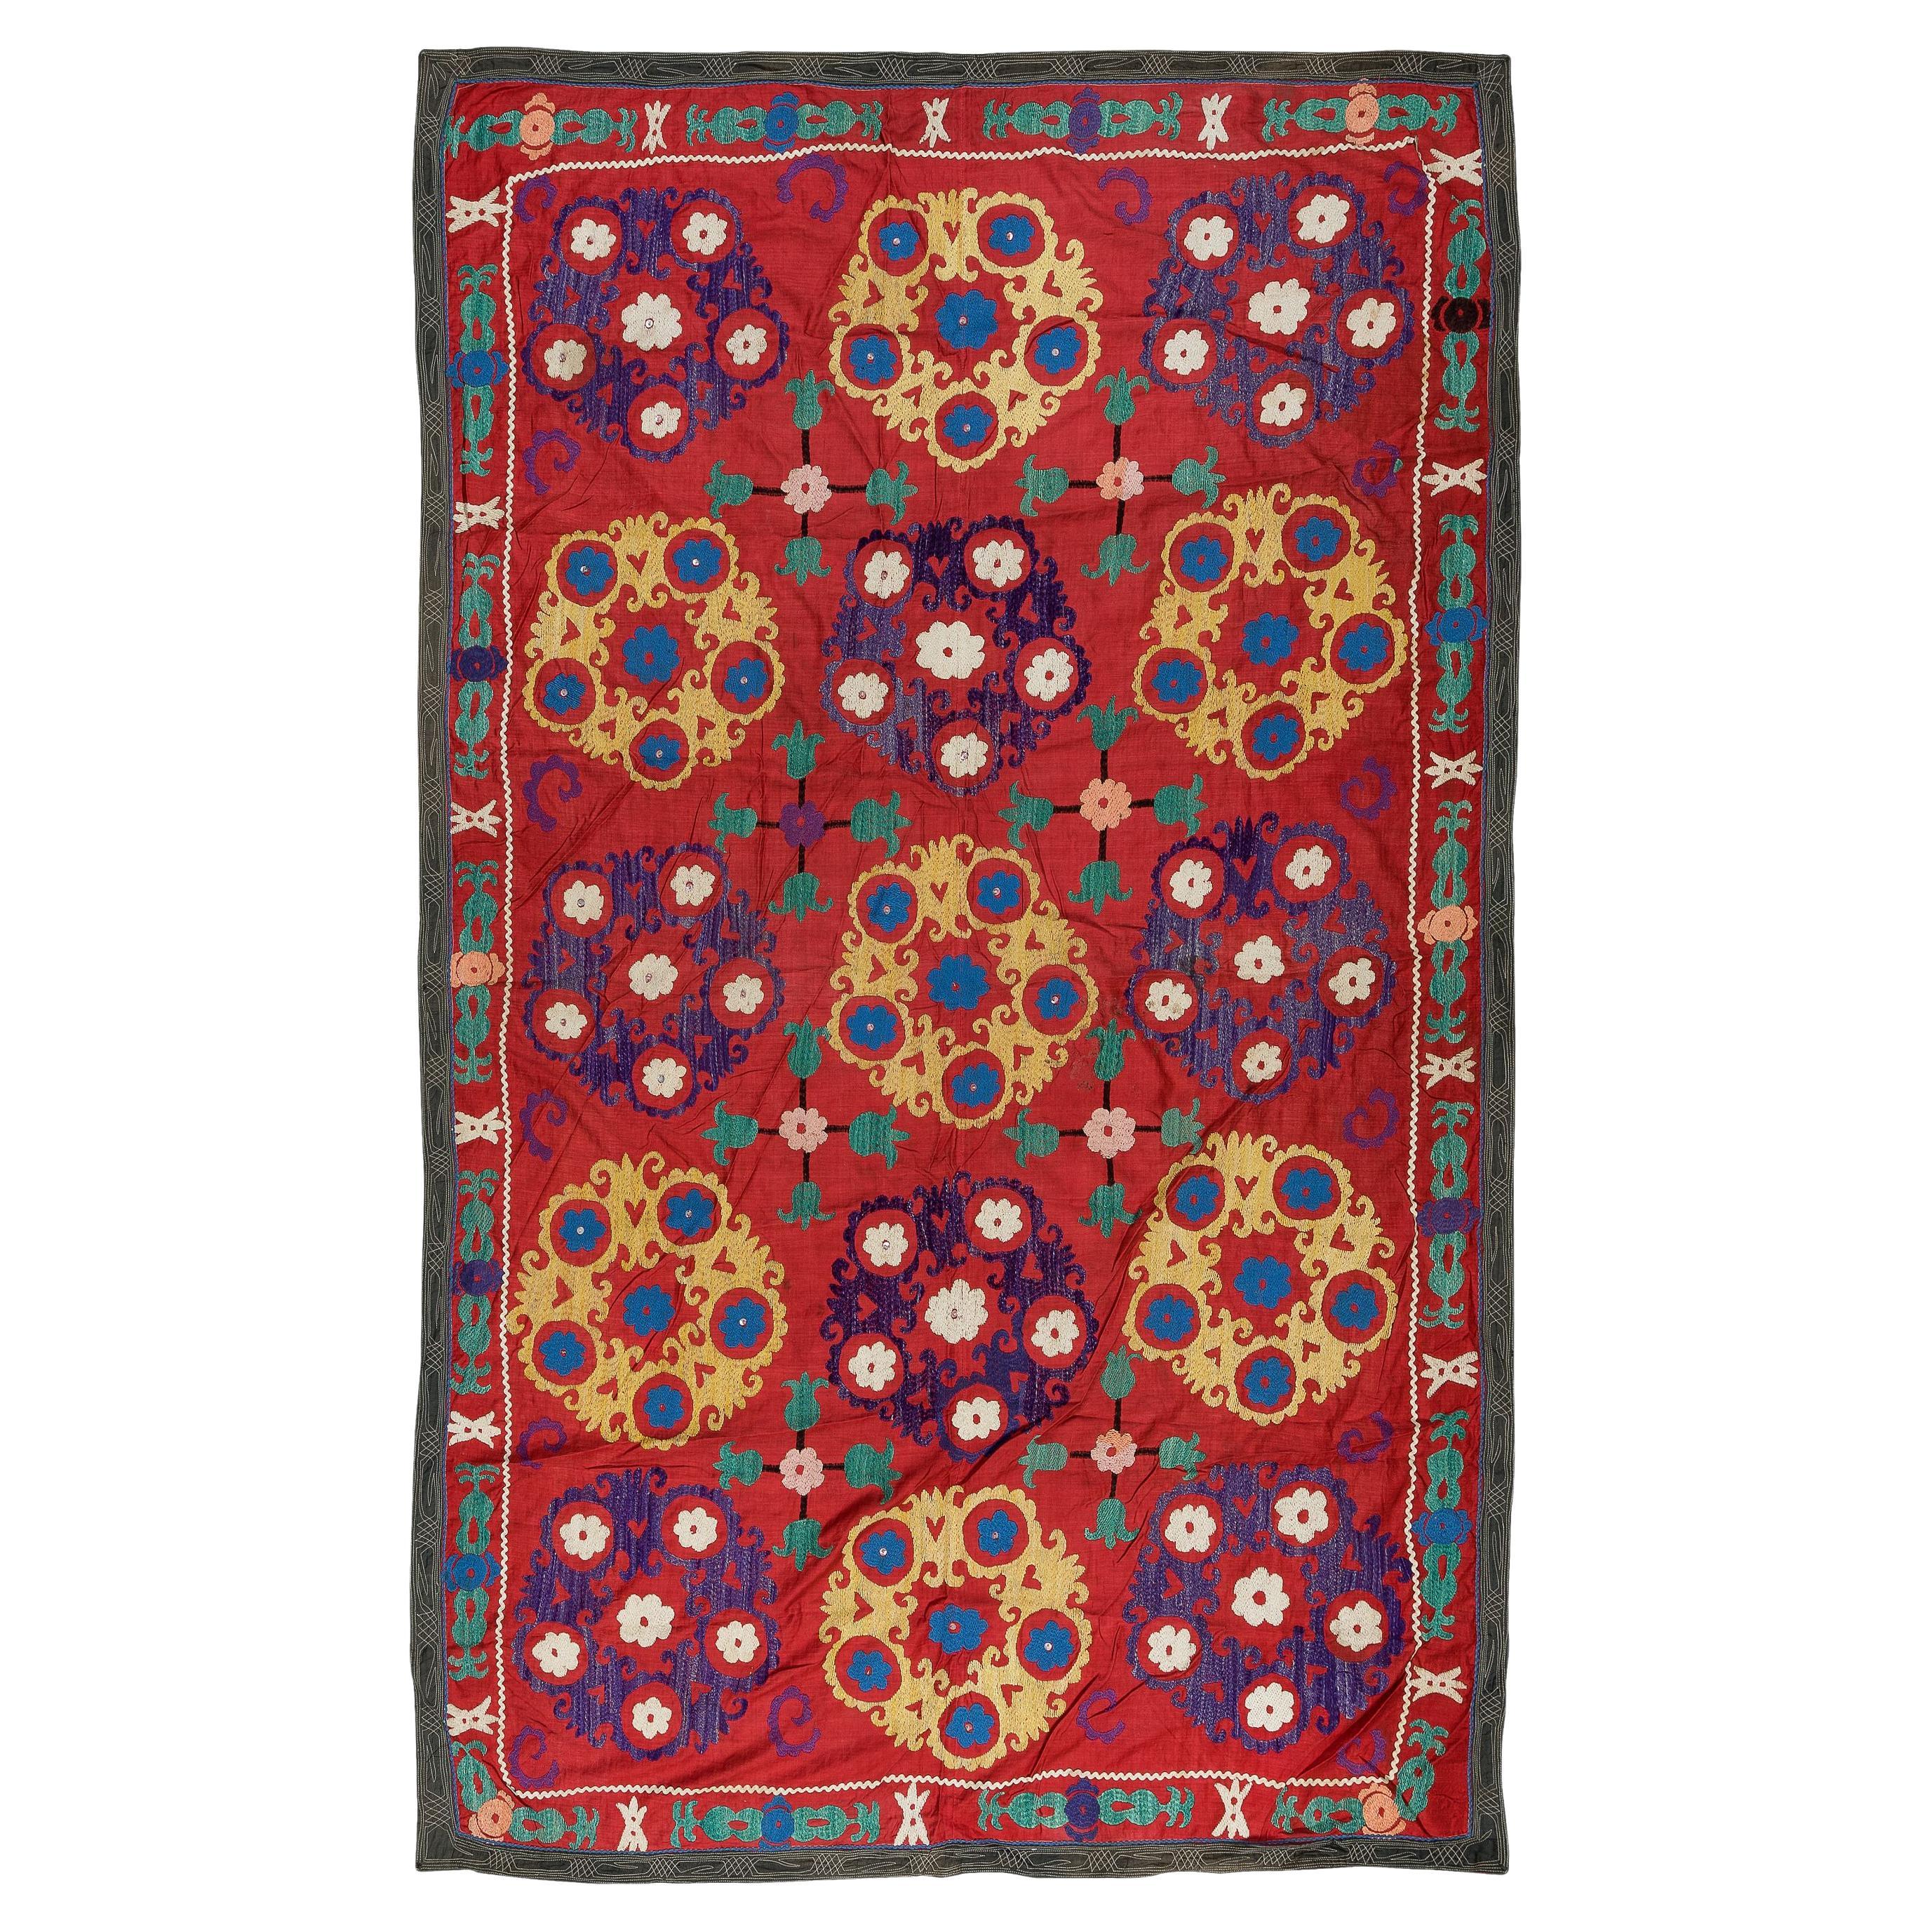 4.6x7 Ft Vintage Silk Embroidery Bed Cover, Uzbek Suzani Wall Hanging in Red For Sale